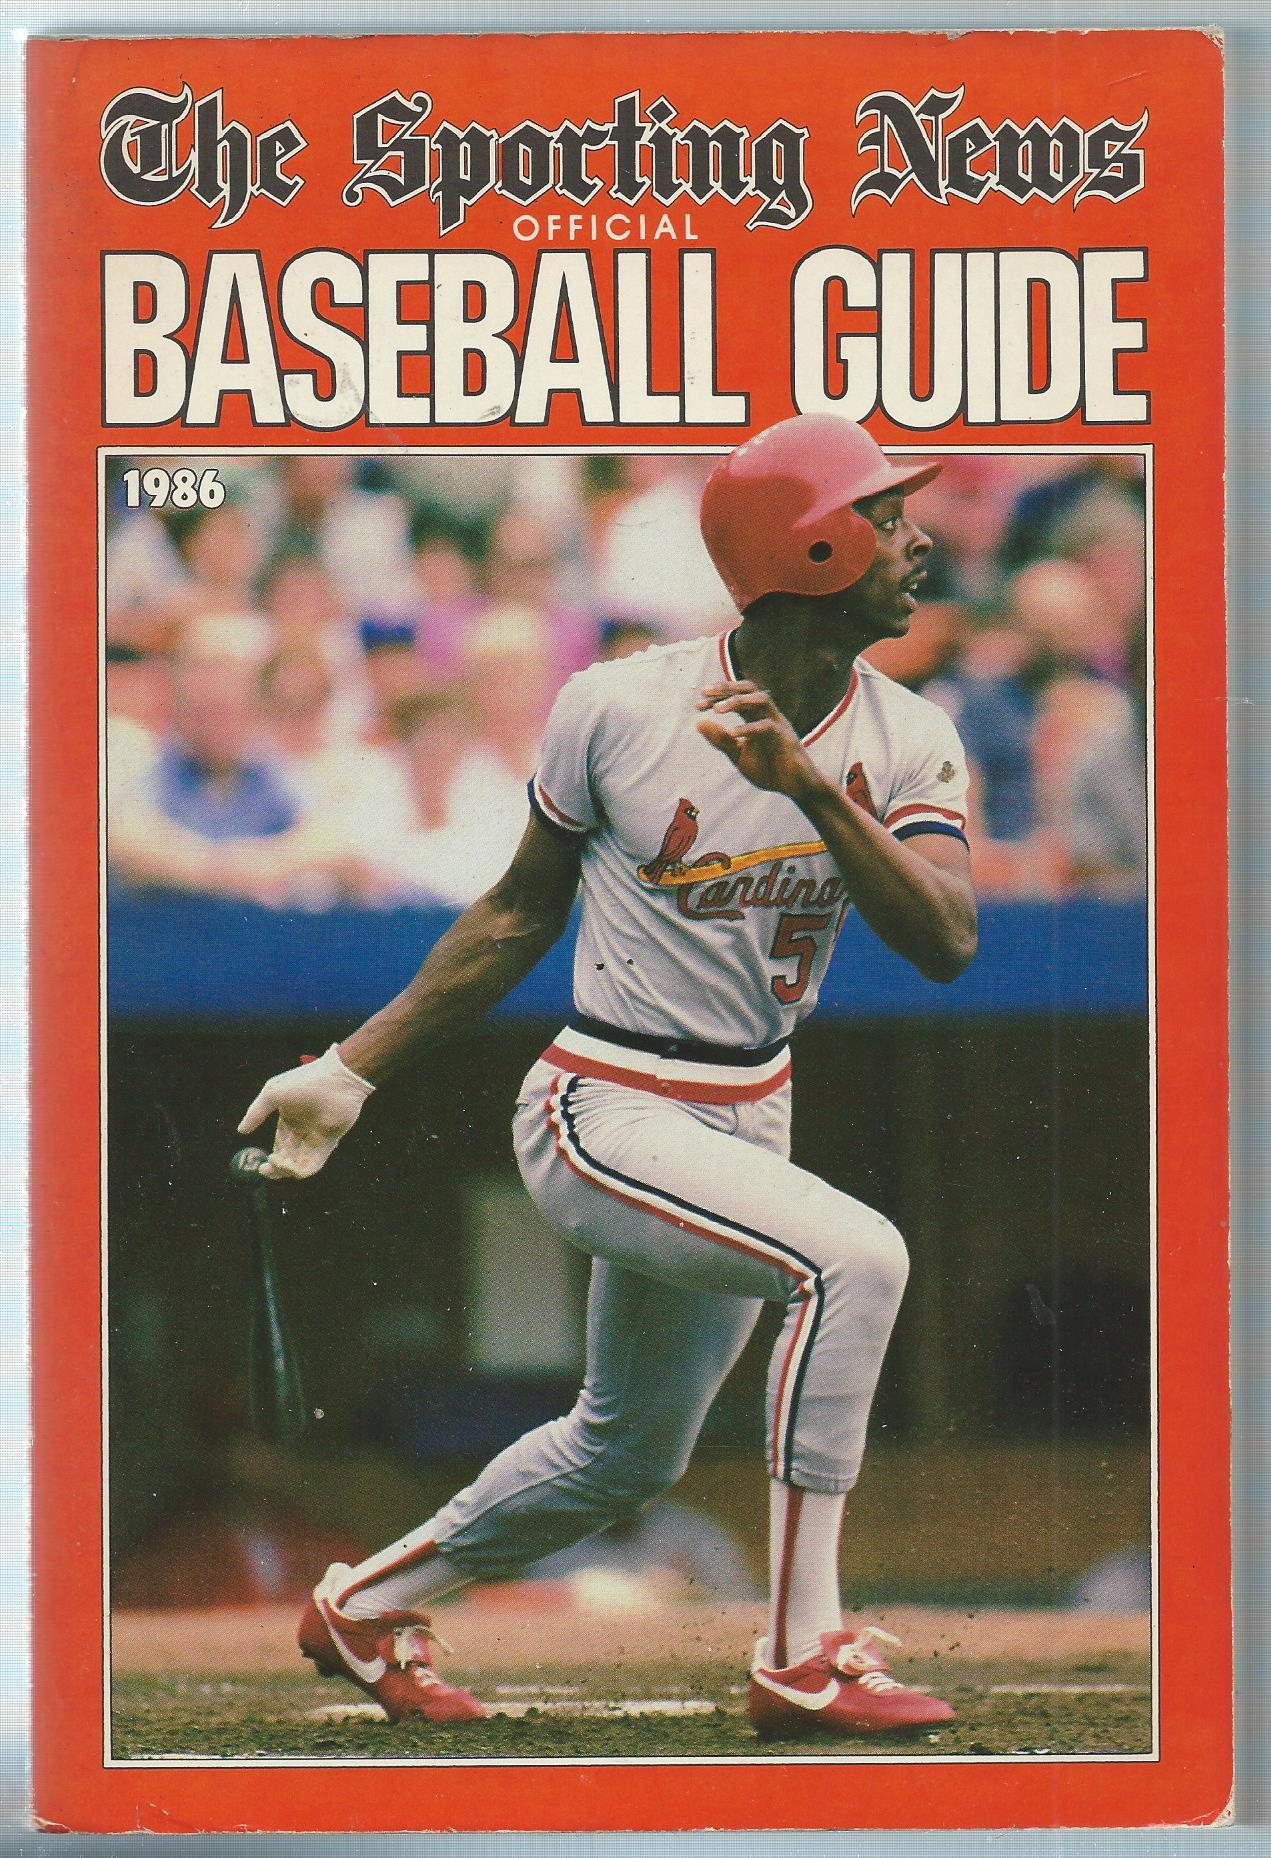 1942-99 The Sporting News Baseball Guide #1986 Willie McGee